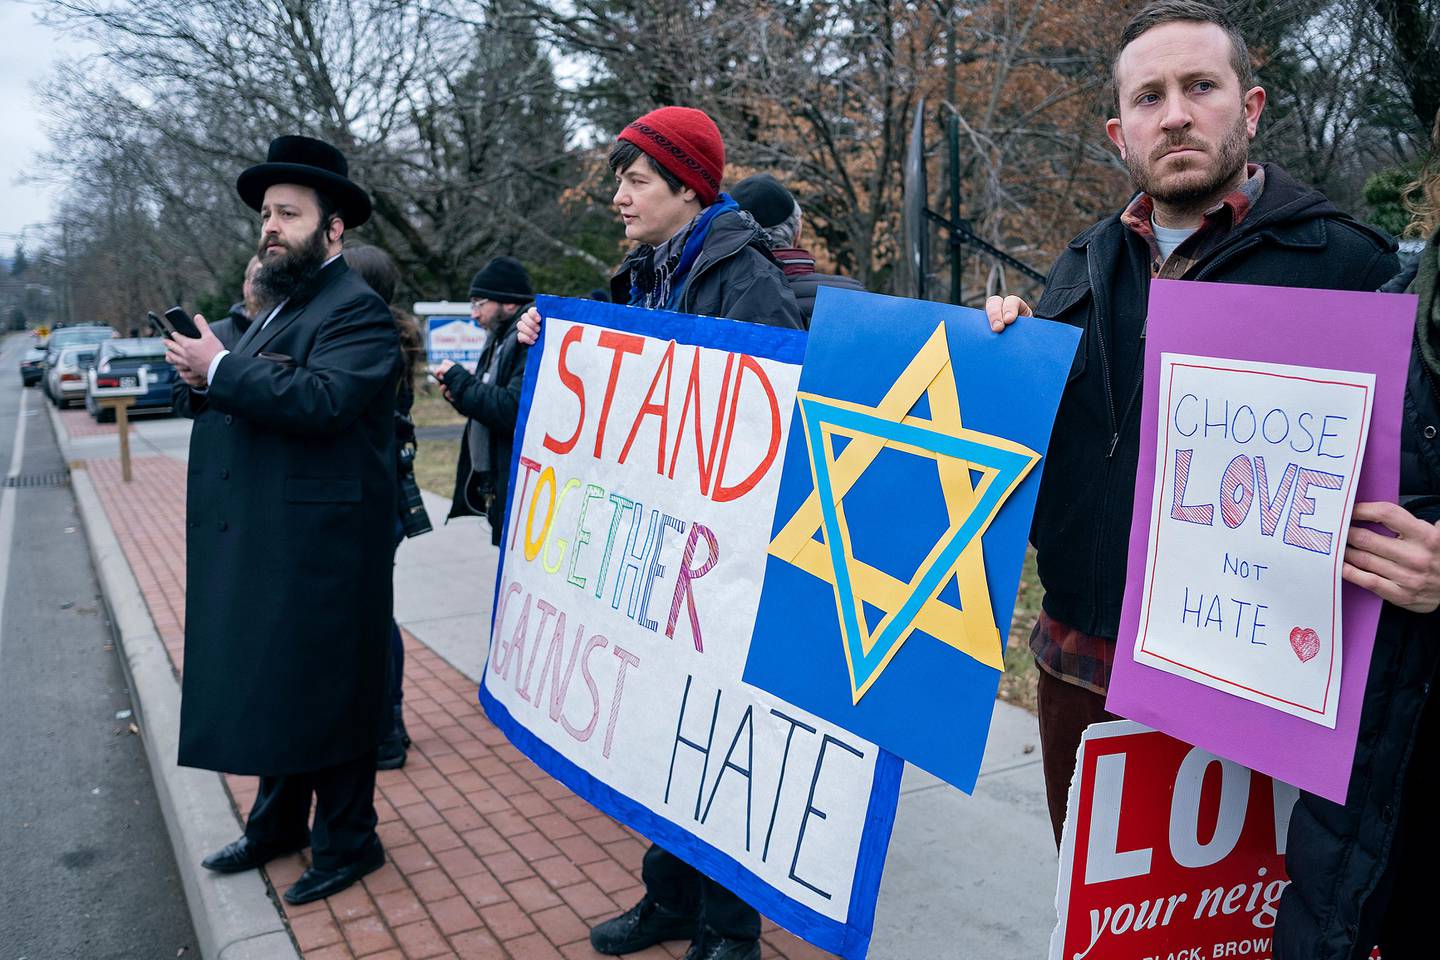 Neighbors gather to show their support of the community near a rabbi's residence in Monsey, N.Y., Sunday, Dec. 29, 2019, following a stabbing Saturday night during a Hanukkah celebration. (AP Photo/Craig Ruttle)